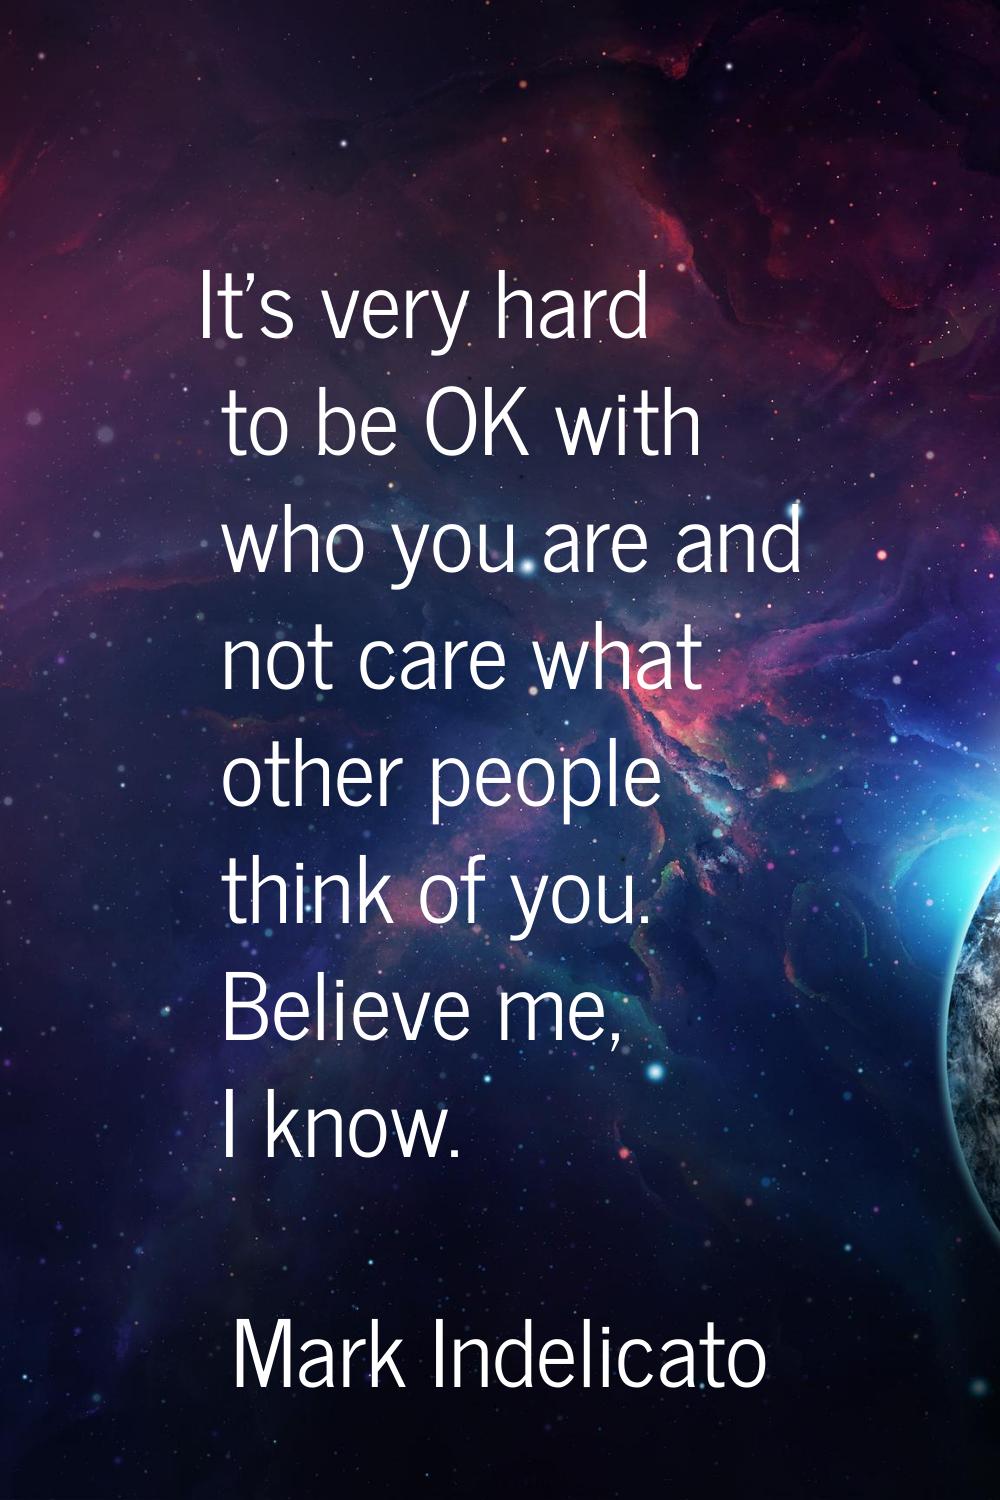 It's very hard to be OK with who you are and not care what other people think of you. Believe me, I